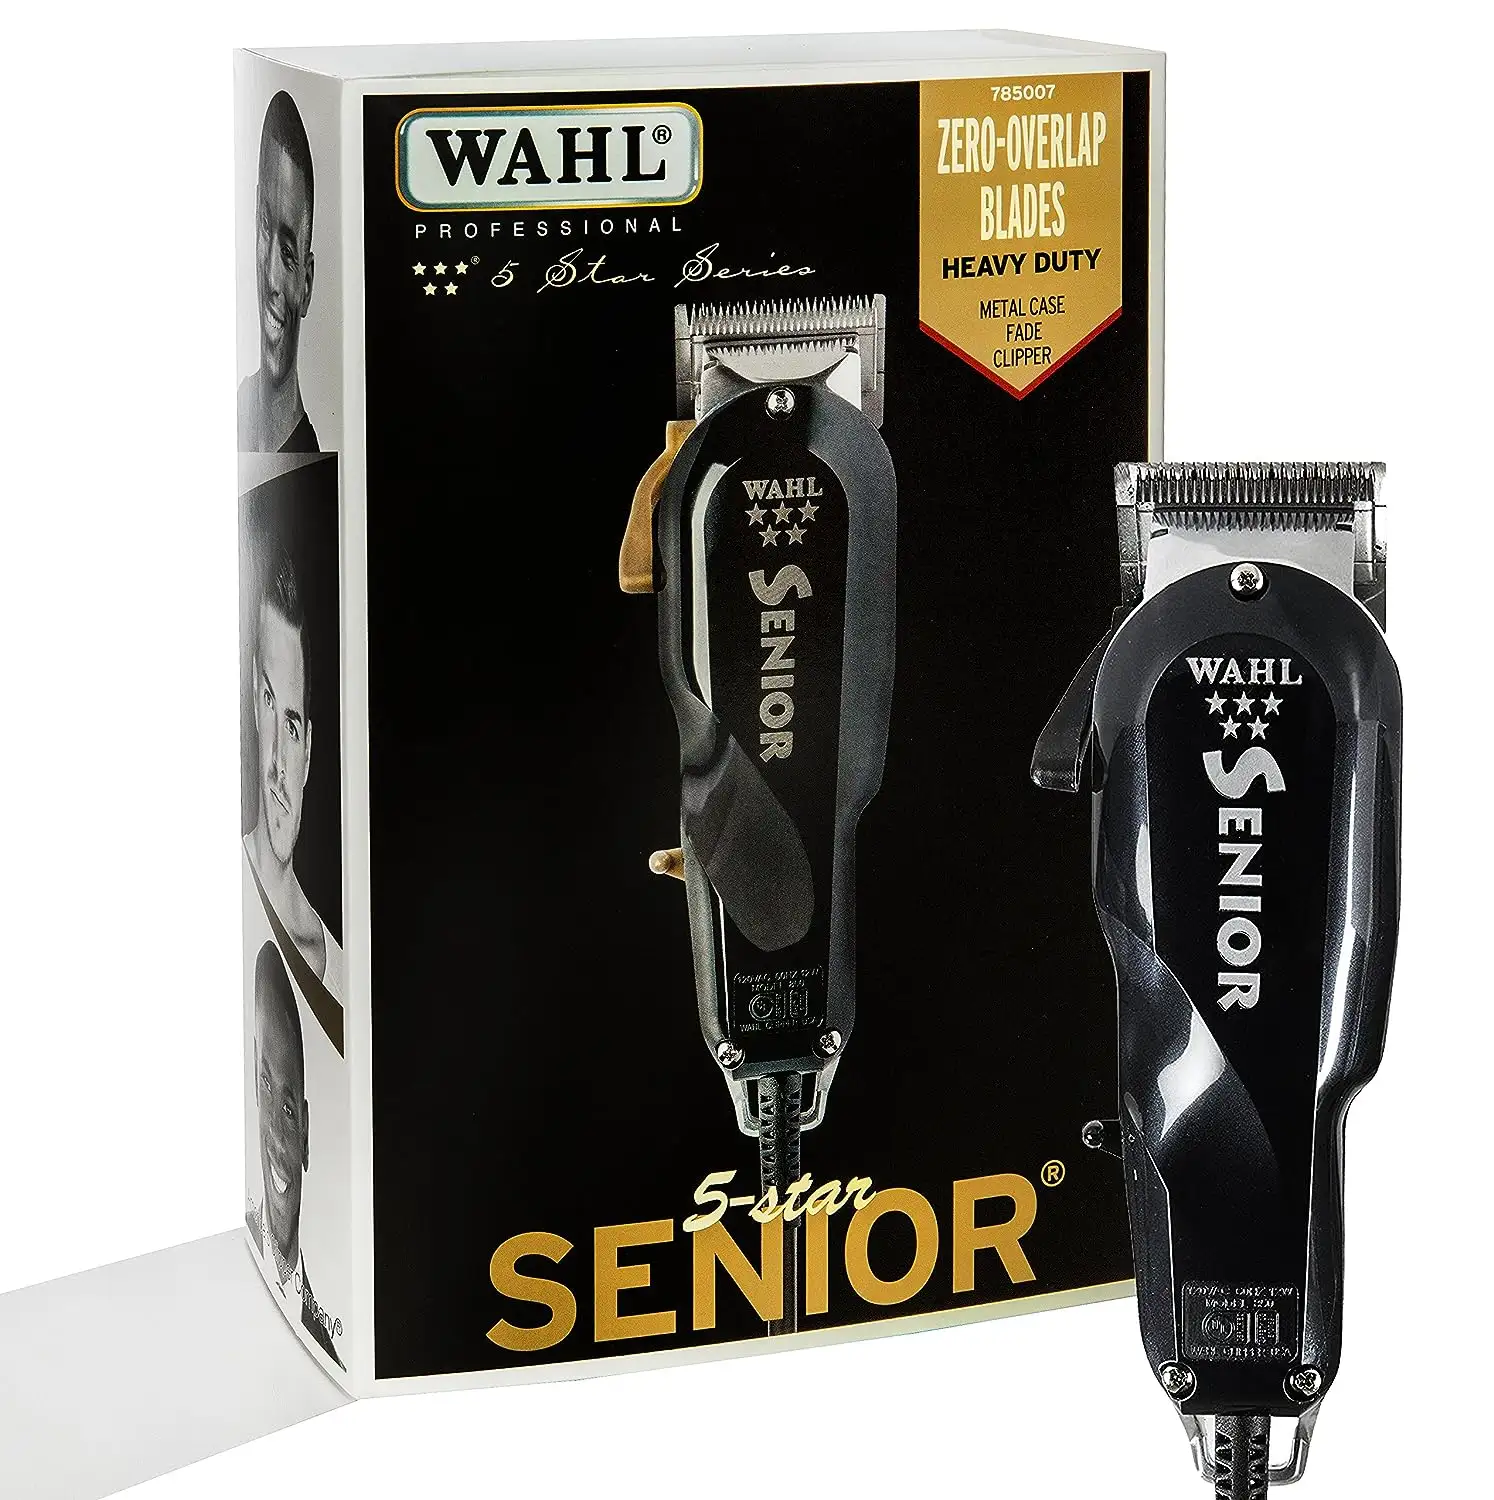 Wahls Professional 5-Star Series Cordless Senior Clippers